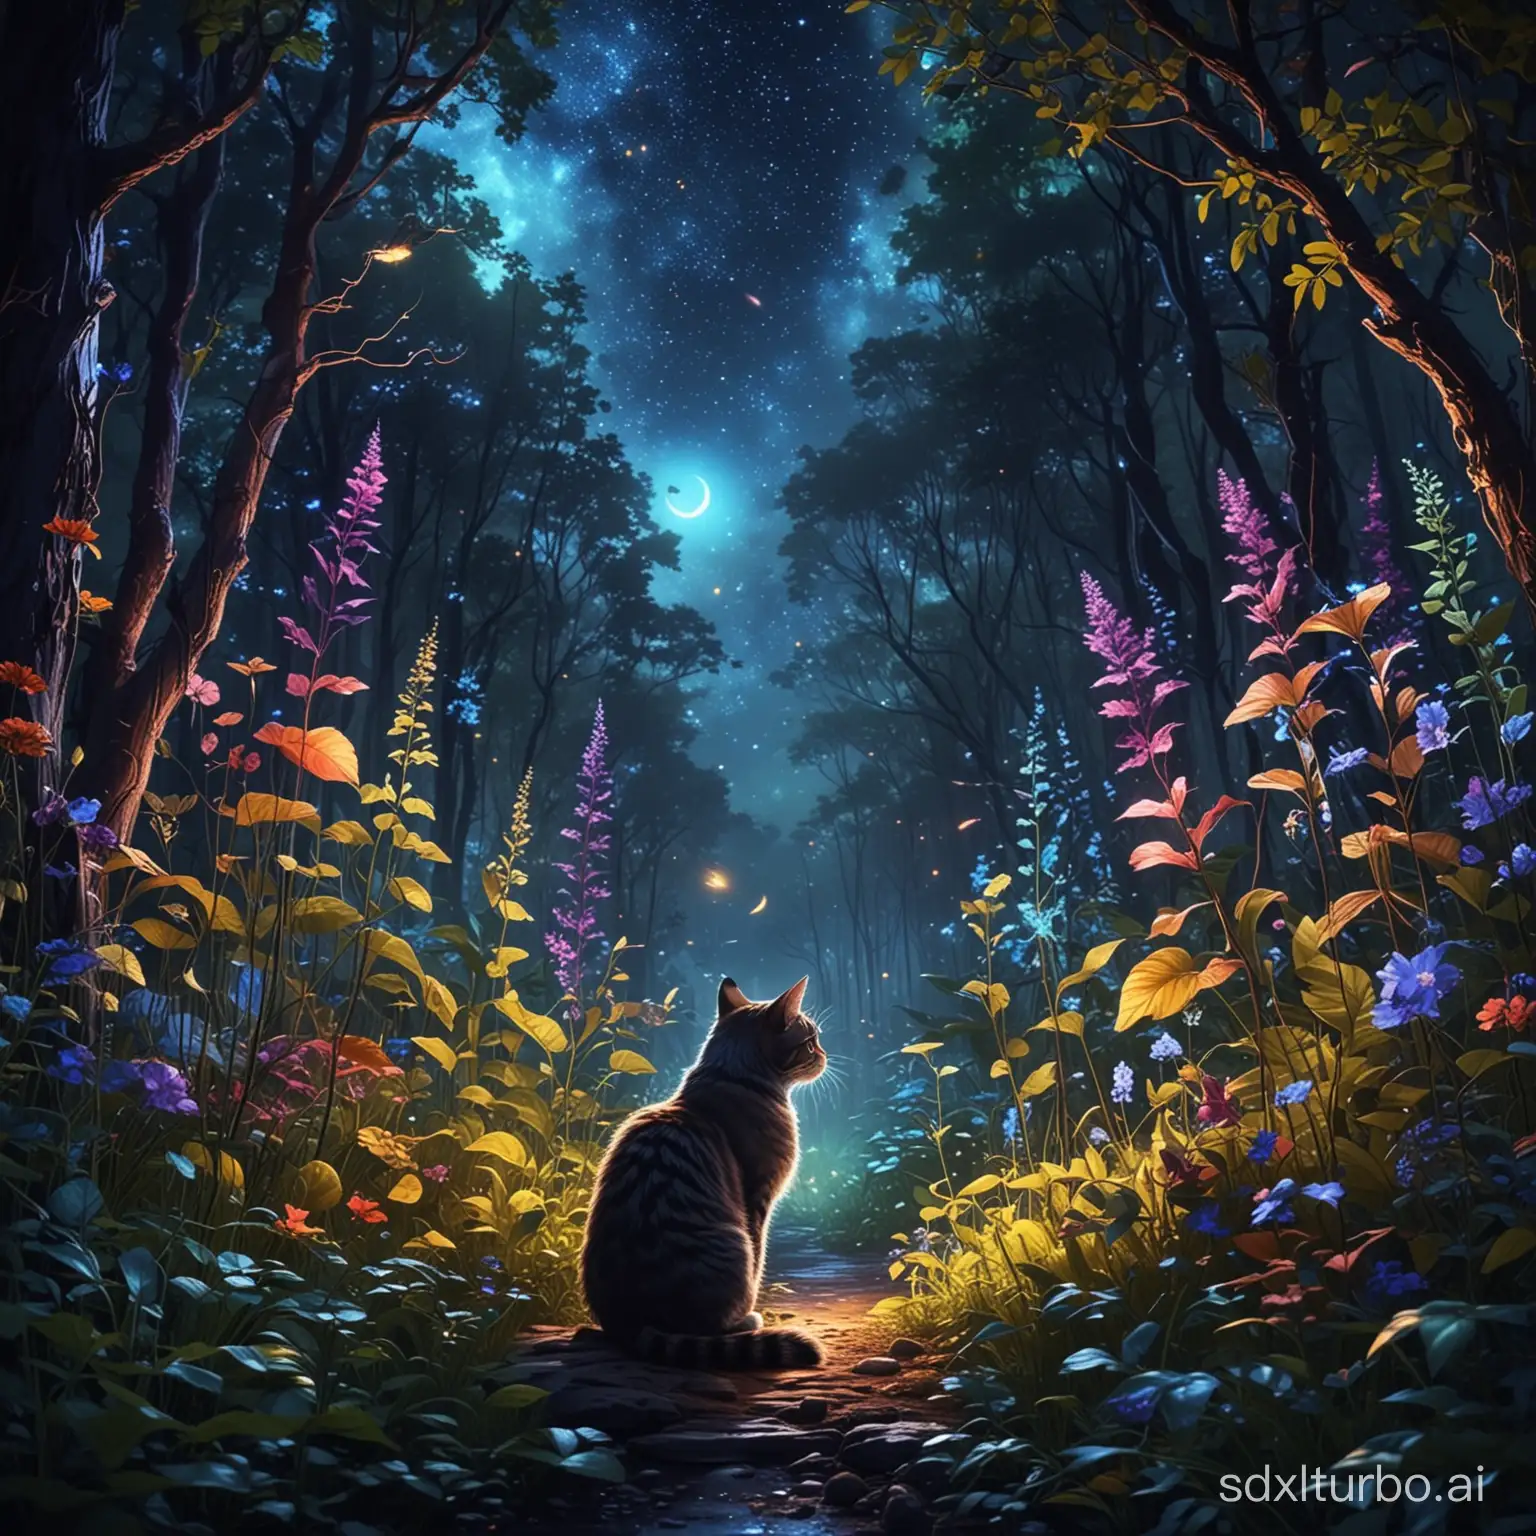 Enchanted-Forest-Glowing-Plants-and-Playful-Cats-Under-the-Night-Sky